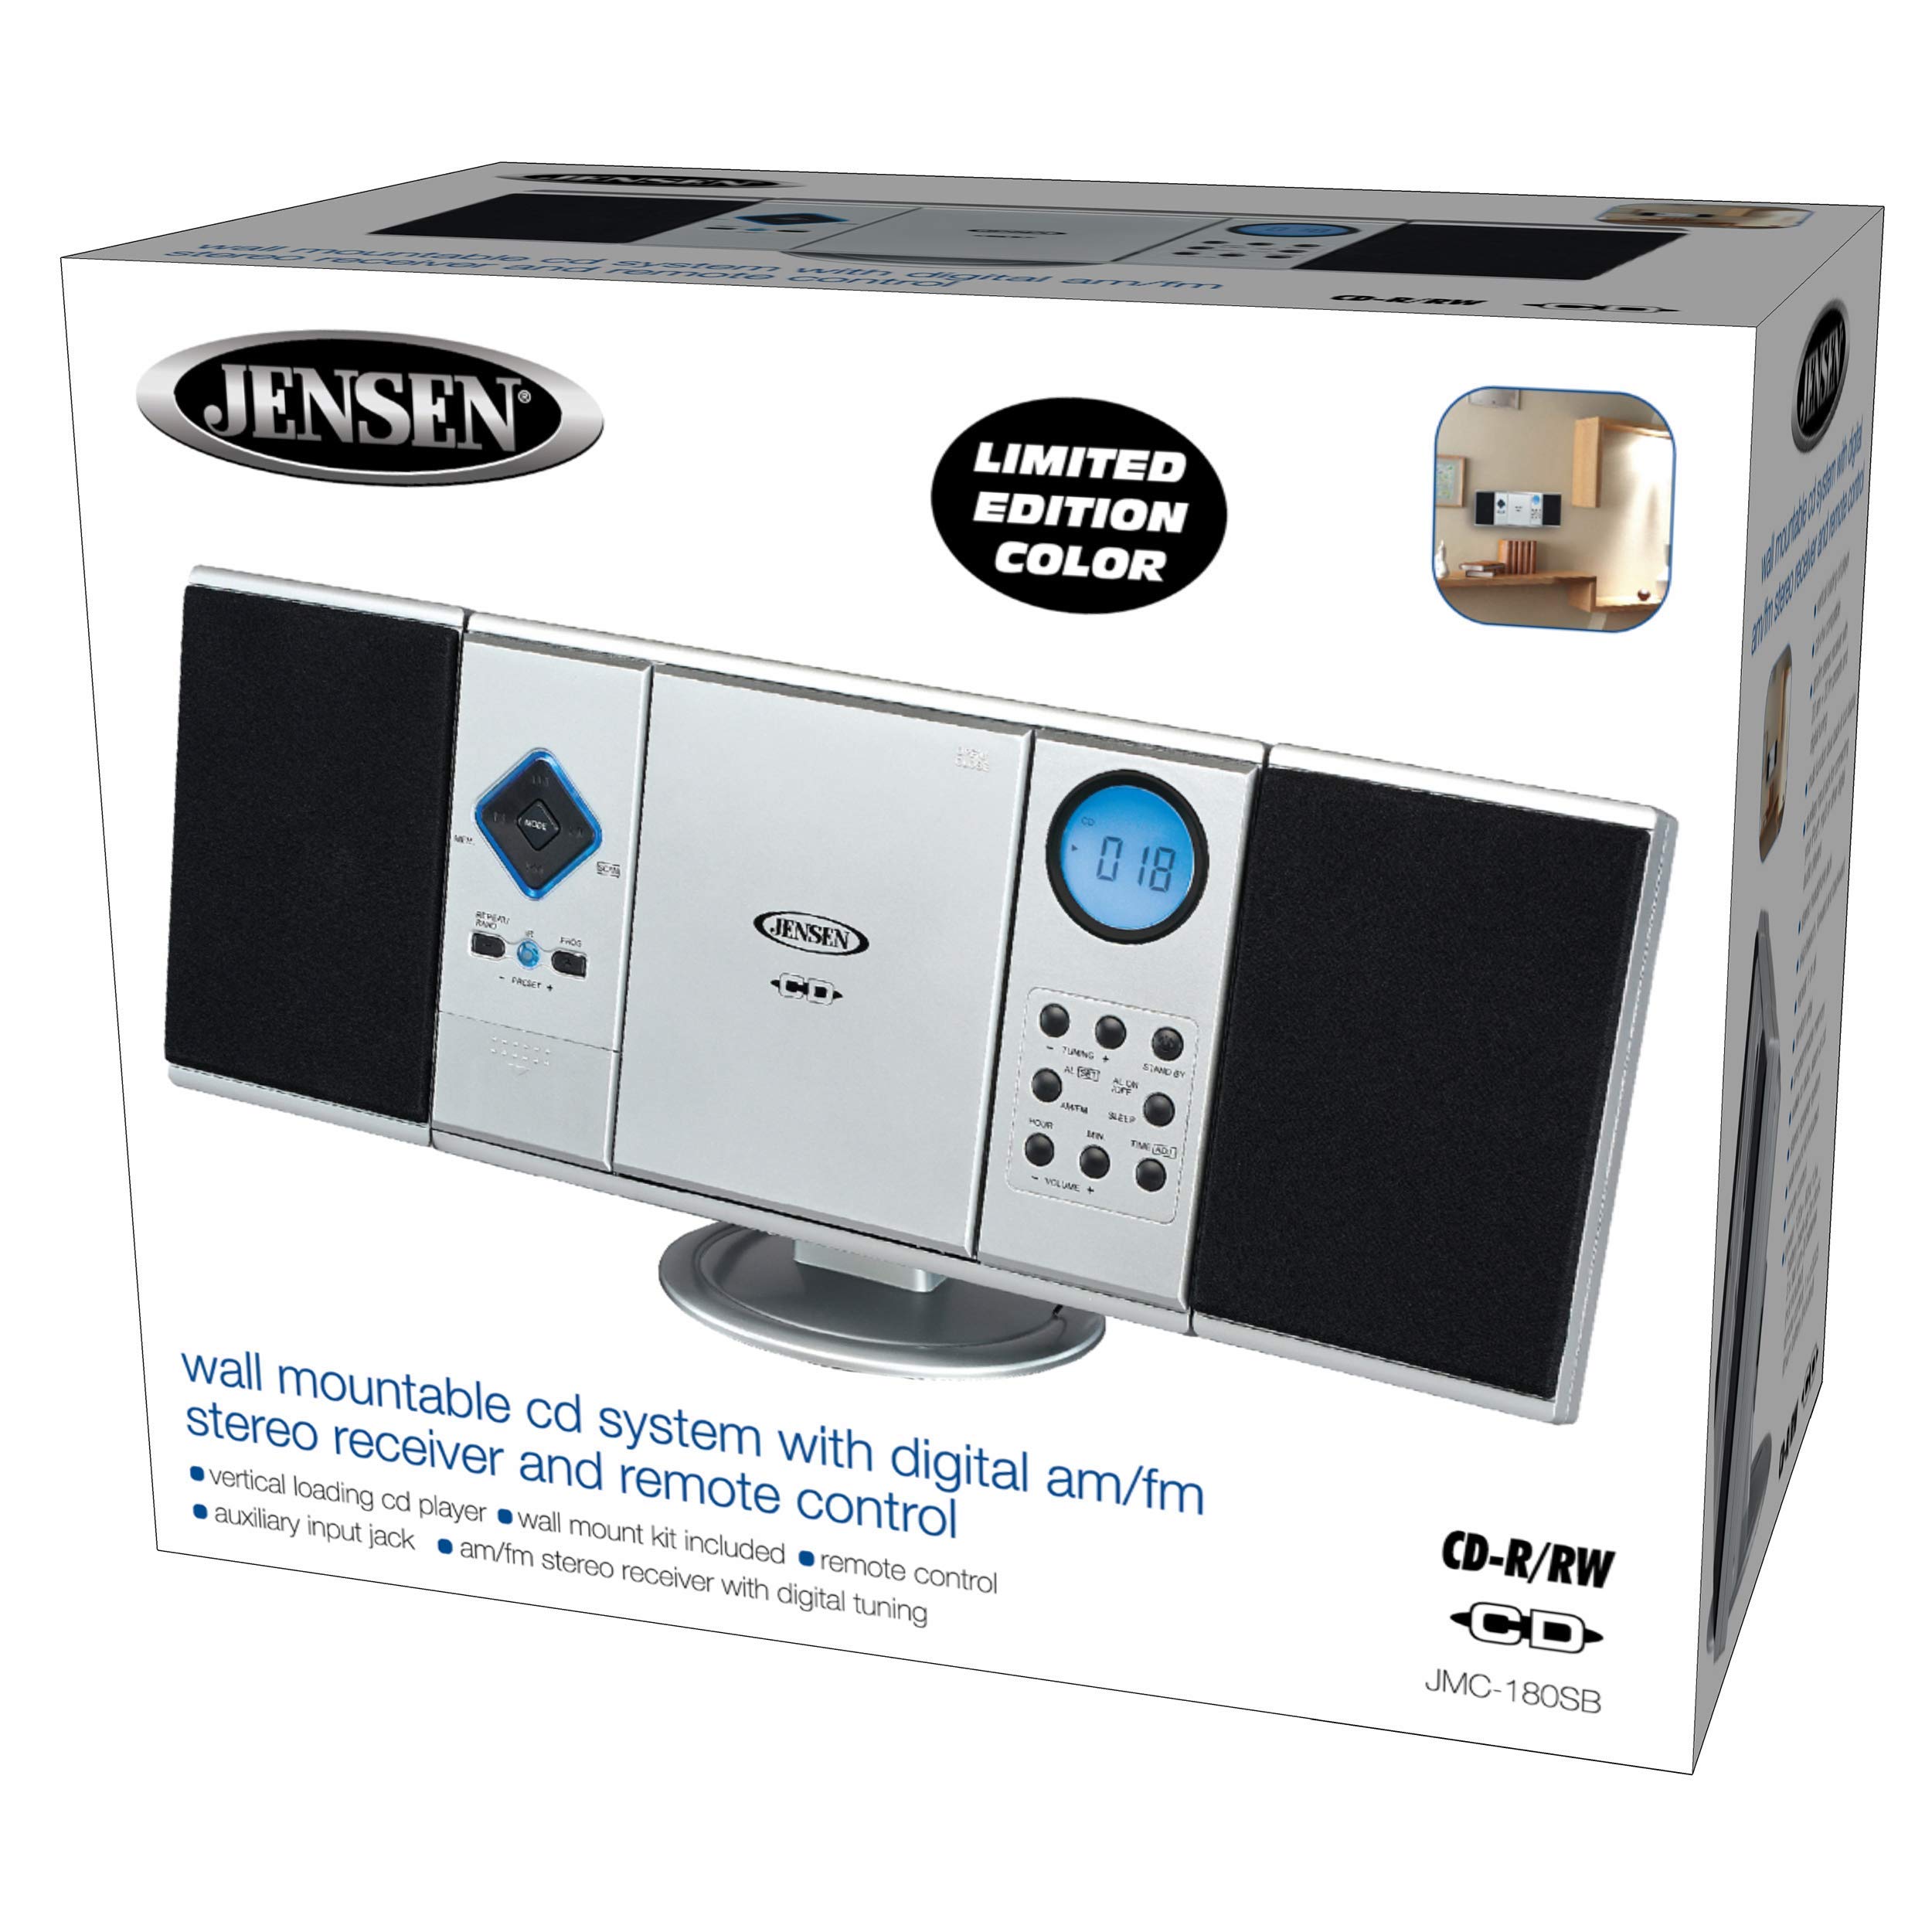 Jensen Modern Black Series JMC-180 Silver Wall Mountable Vertical Loading CD Music System, Digital AM/FM Stereo with Speakers, Aux-in, & Headphone Jack Remote Control (Silver)